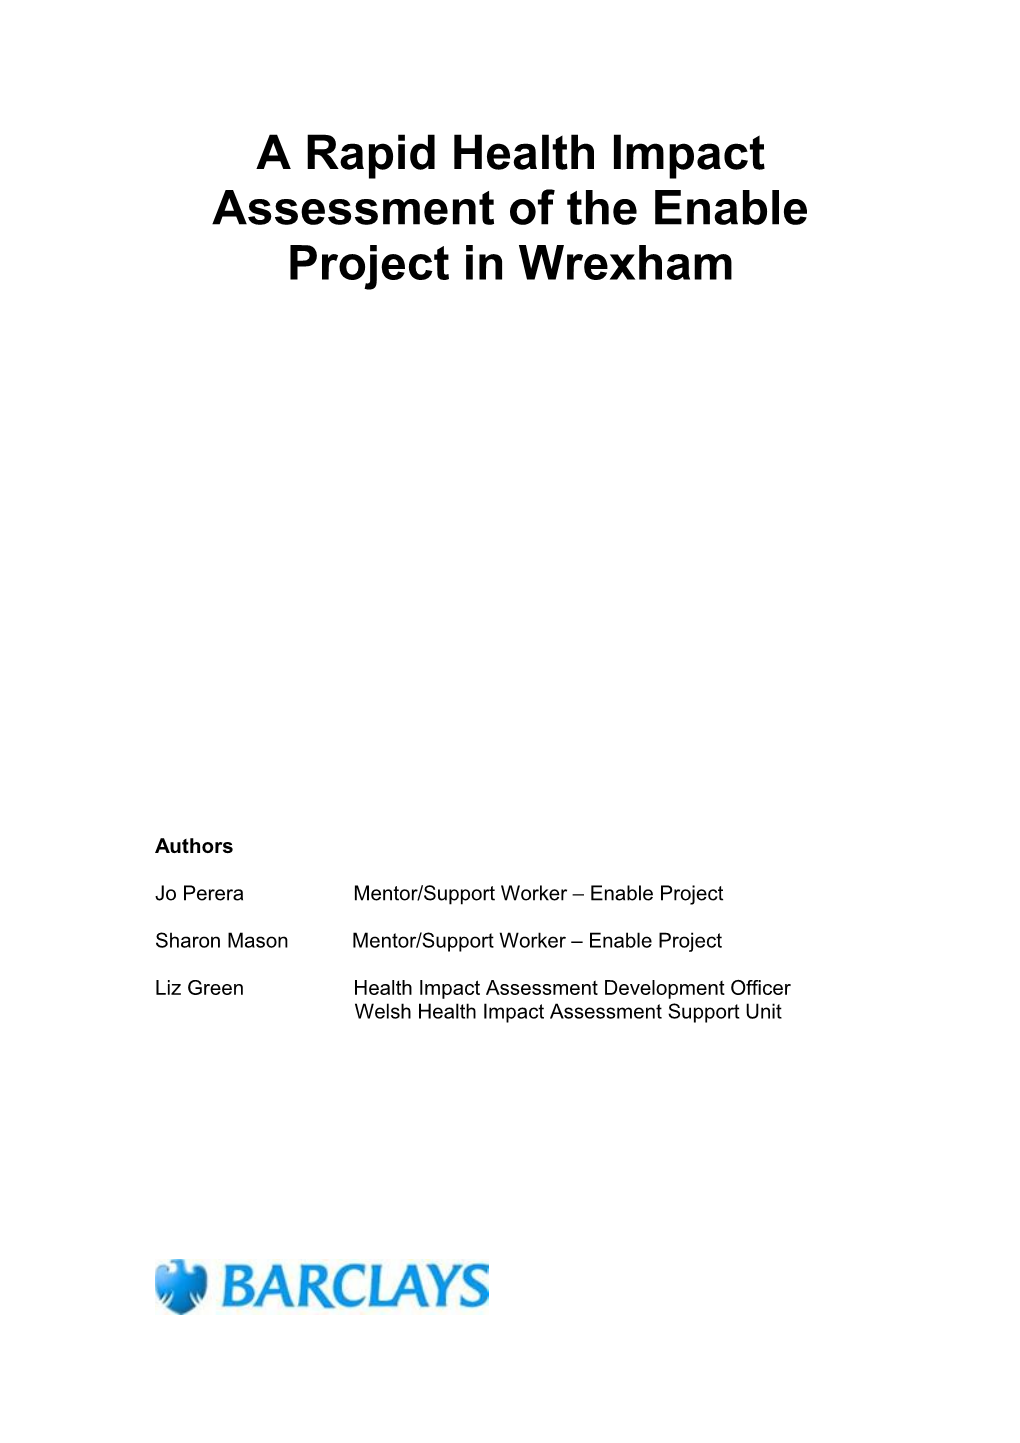 A Rapid Health Impact Assessment of the Enable Project in Wrexham